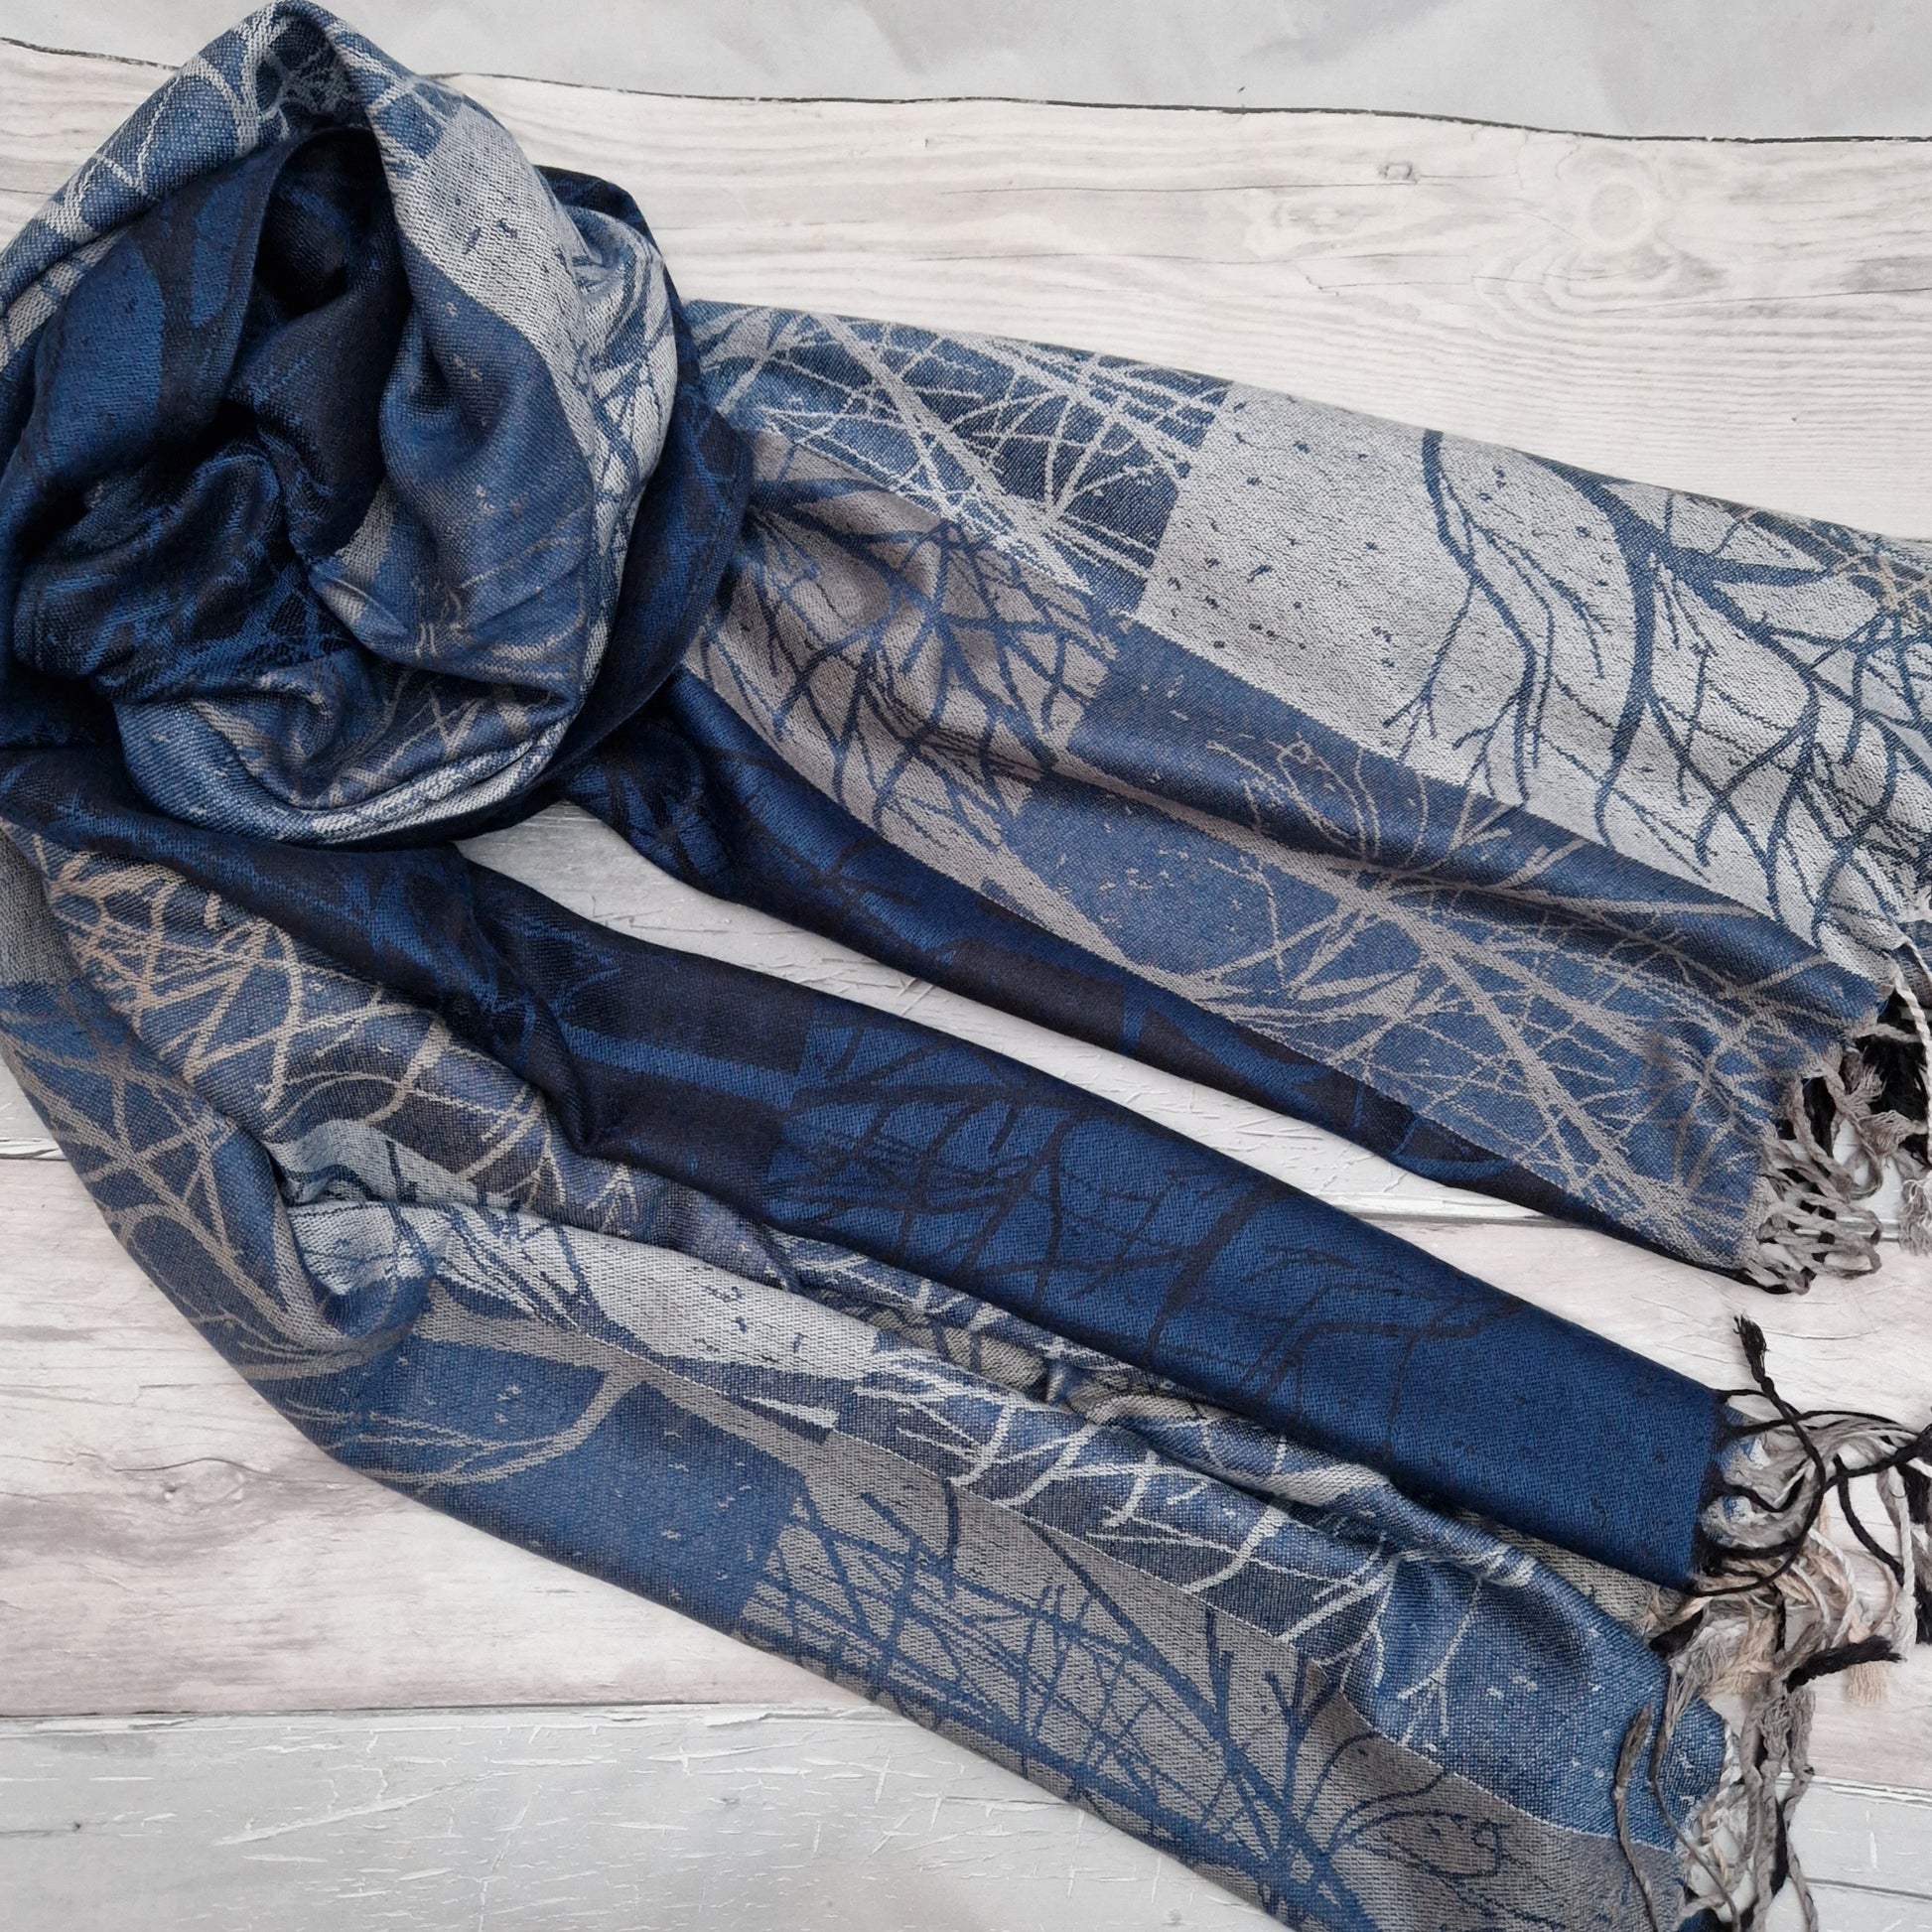 Wood Land forest scarf in blue, silver and bronze colours.